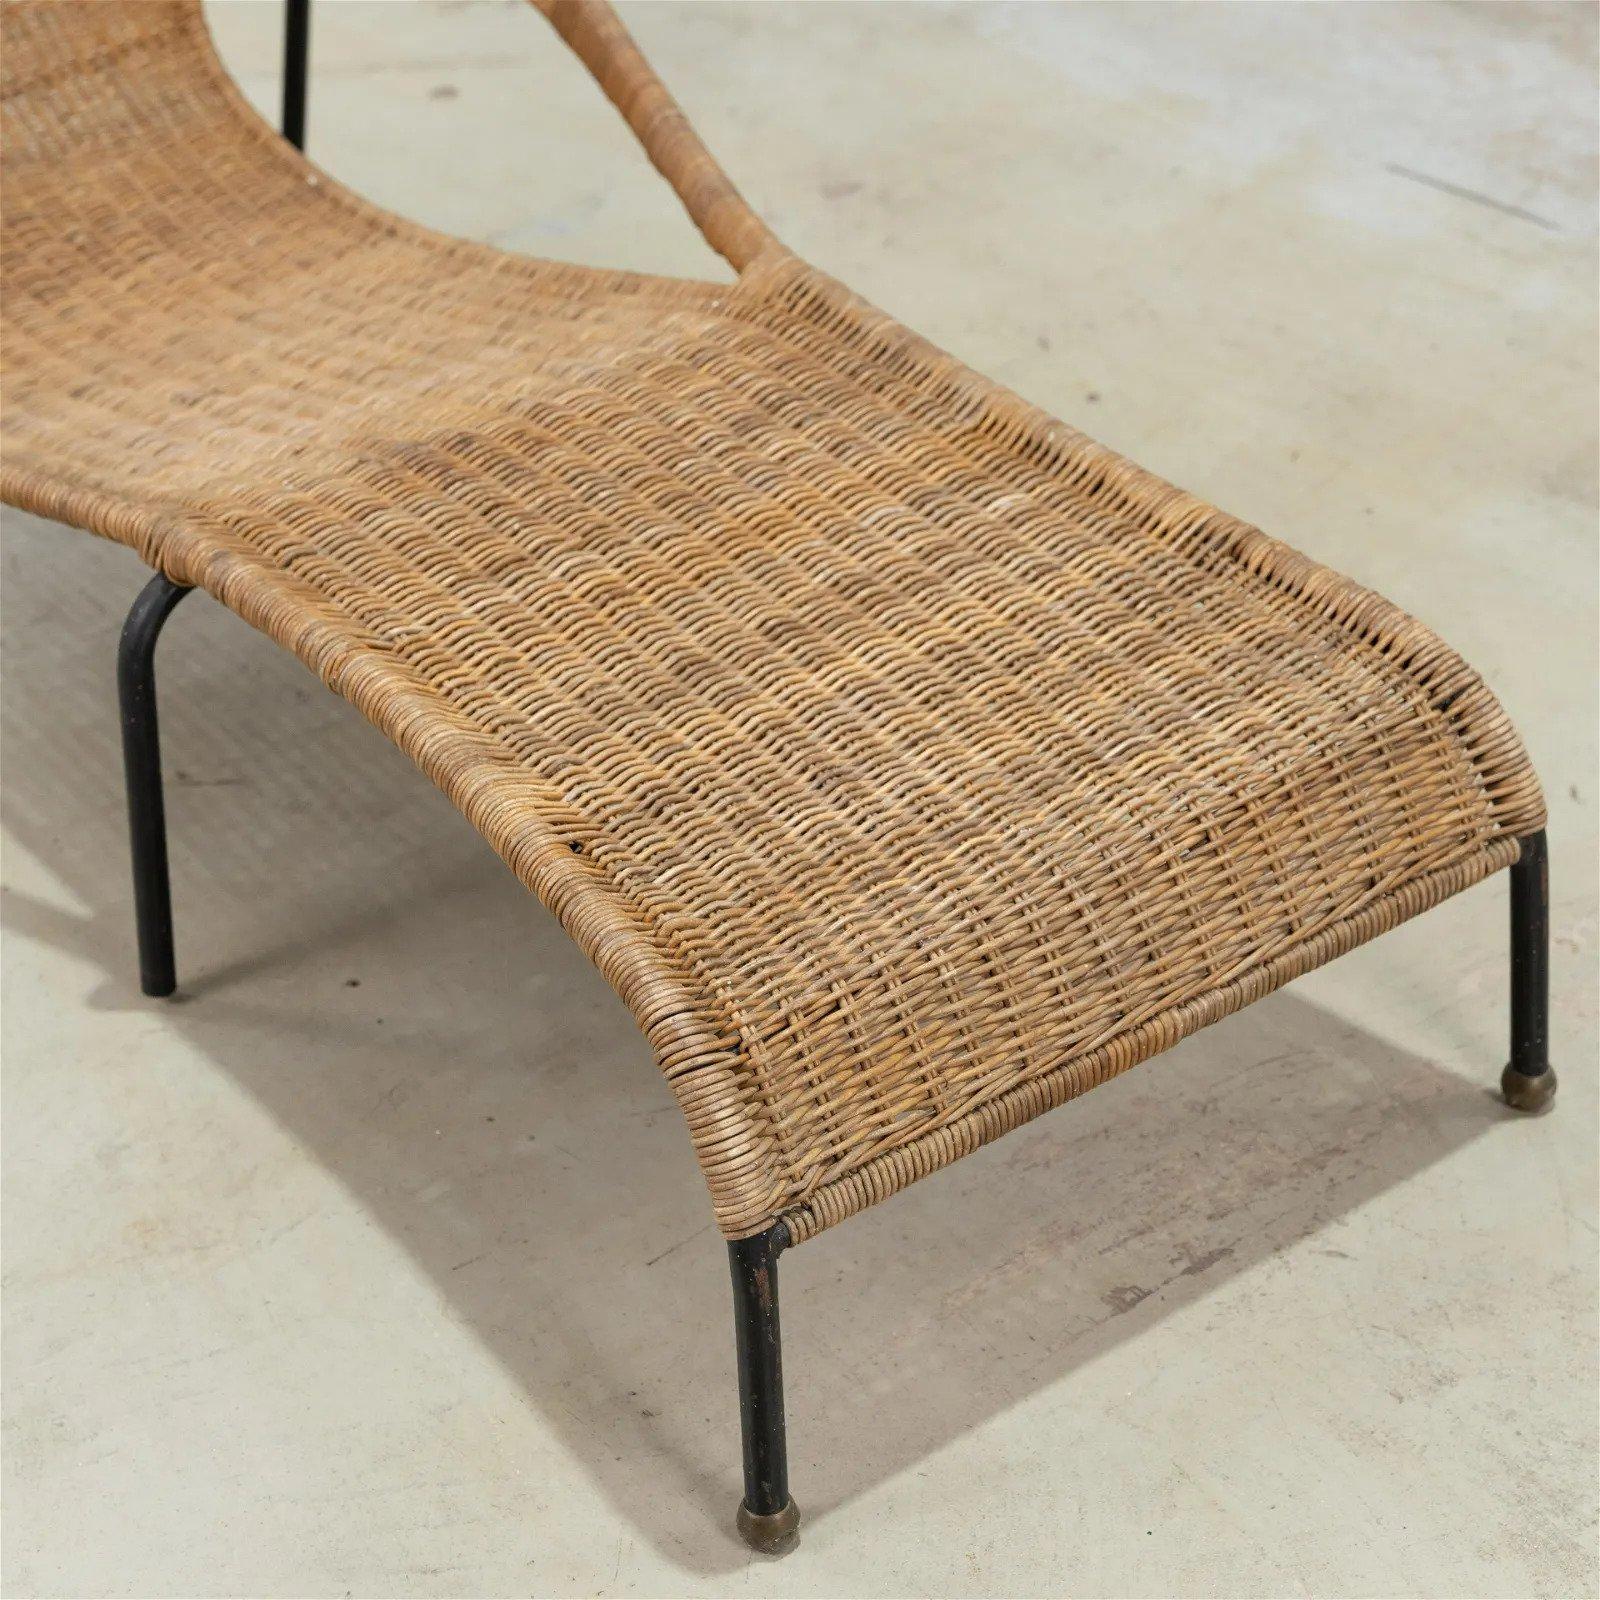 Chaise longue, in wicker and metal, by Francis Mair, United States of America, 1960s.

Sculptural chaise longue by Californian designer Francis Mair. This rare piece has a freeform appearance that is interesting from any point of view, due to its